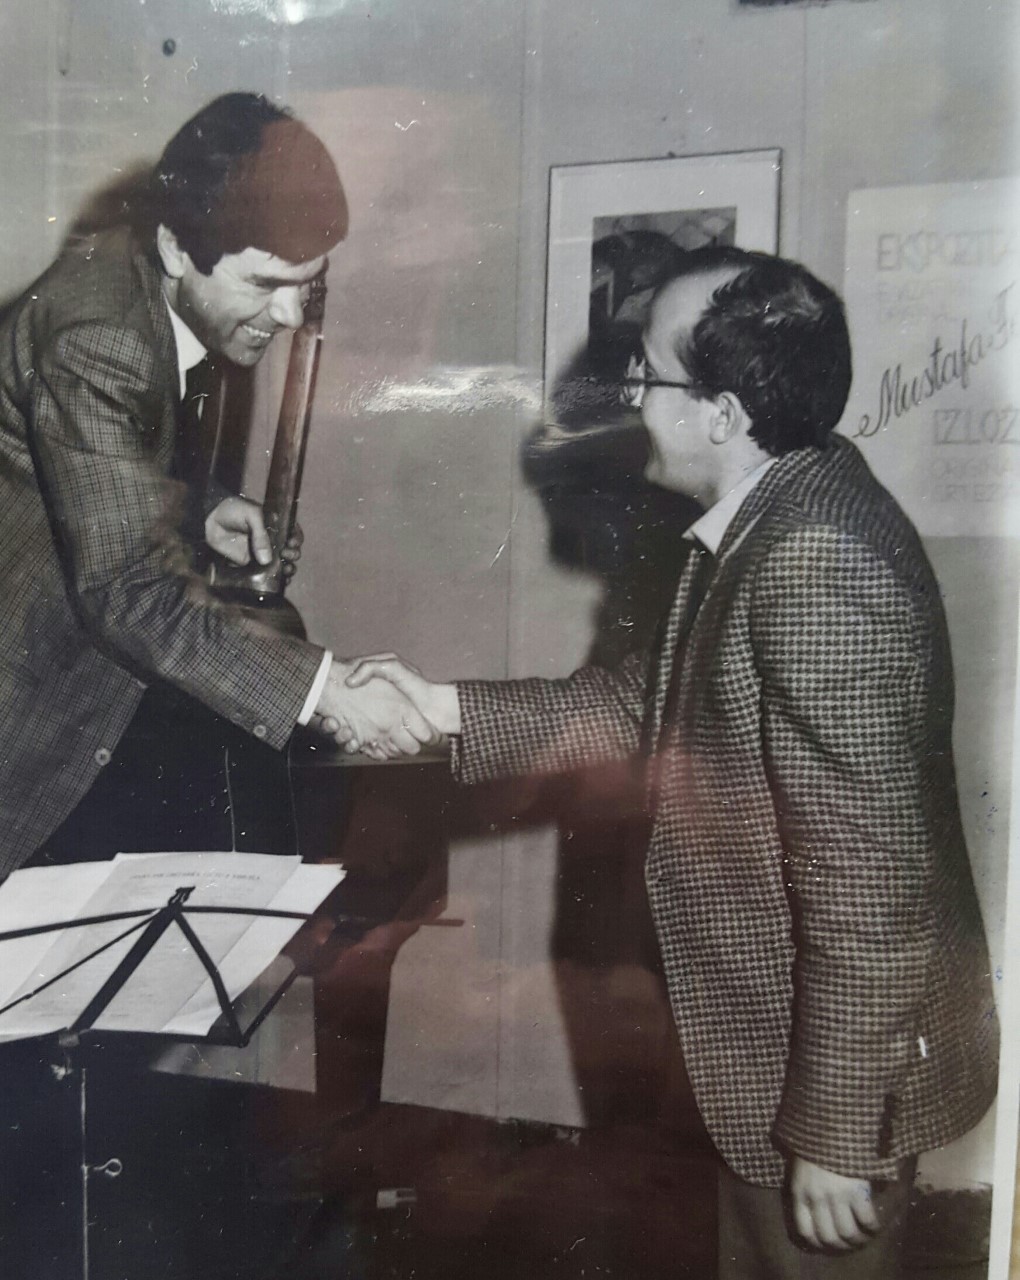 Rudi with Ehat Musa, 1983